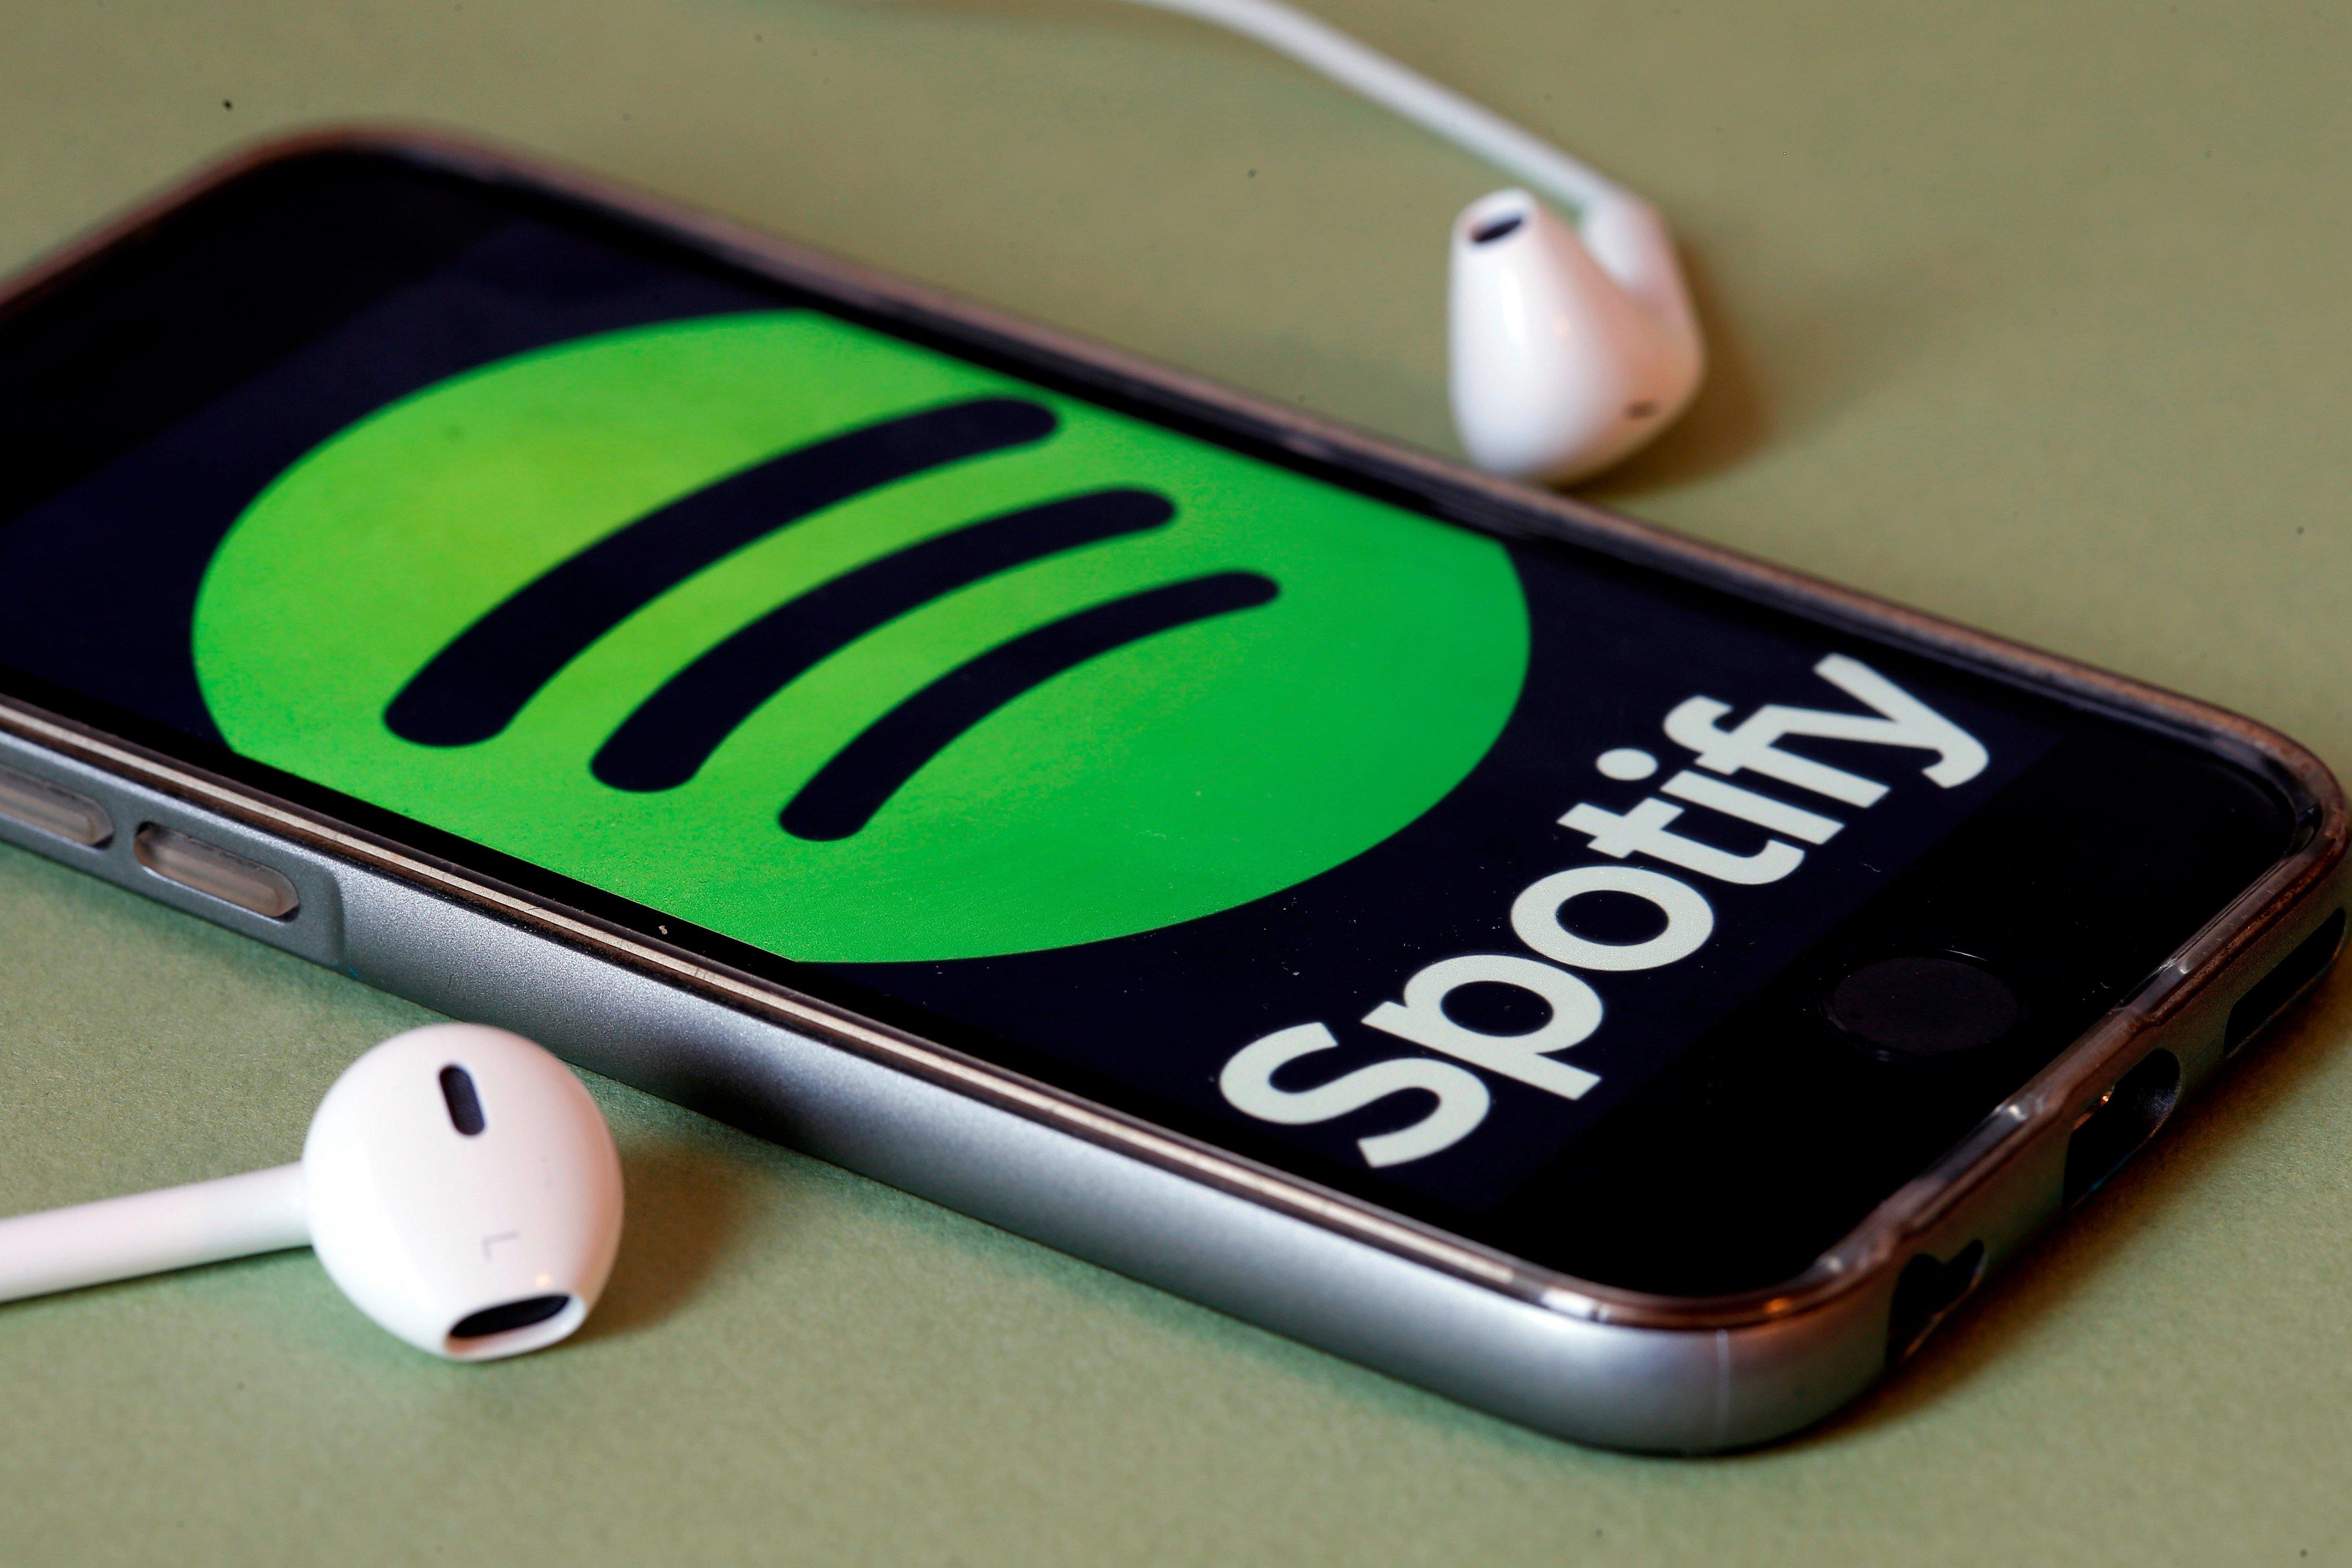 Spotify logo on phone with headphones